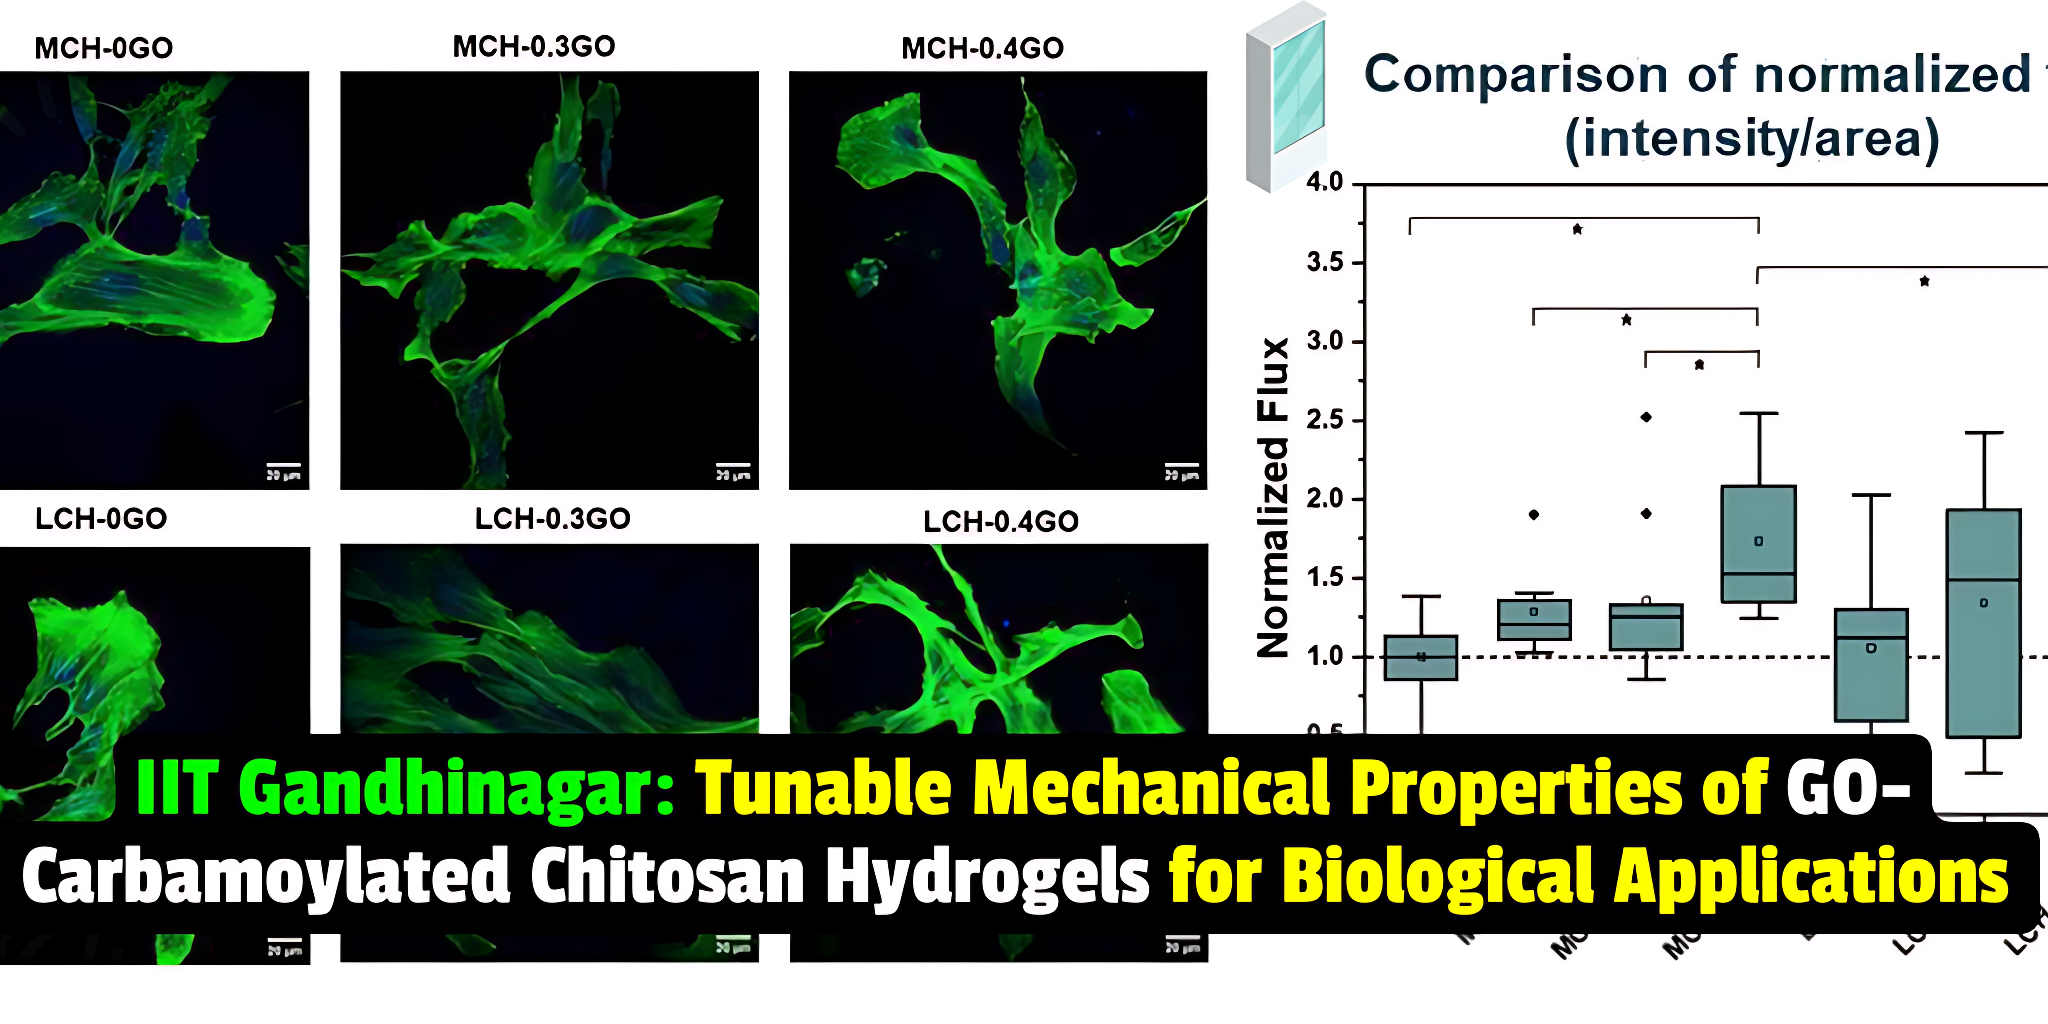 IIT Gandhinagar researchers conduct a new study to investigate the potential of GO-based hydrogels in biological applications